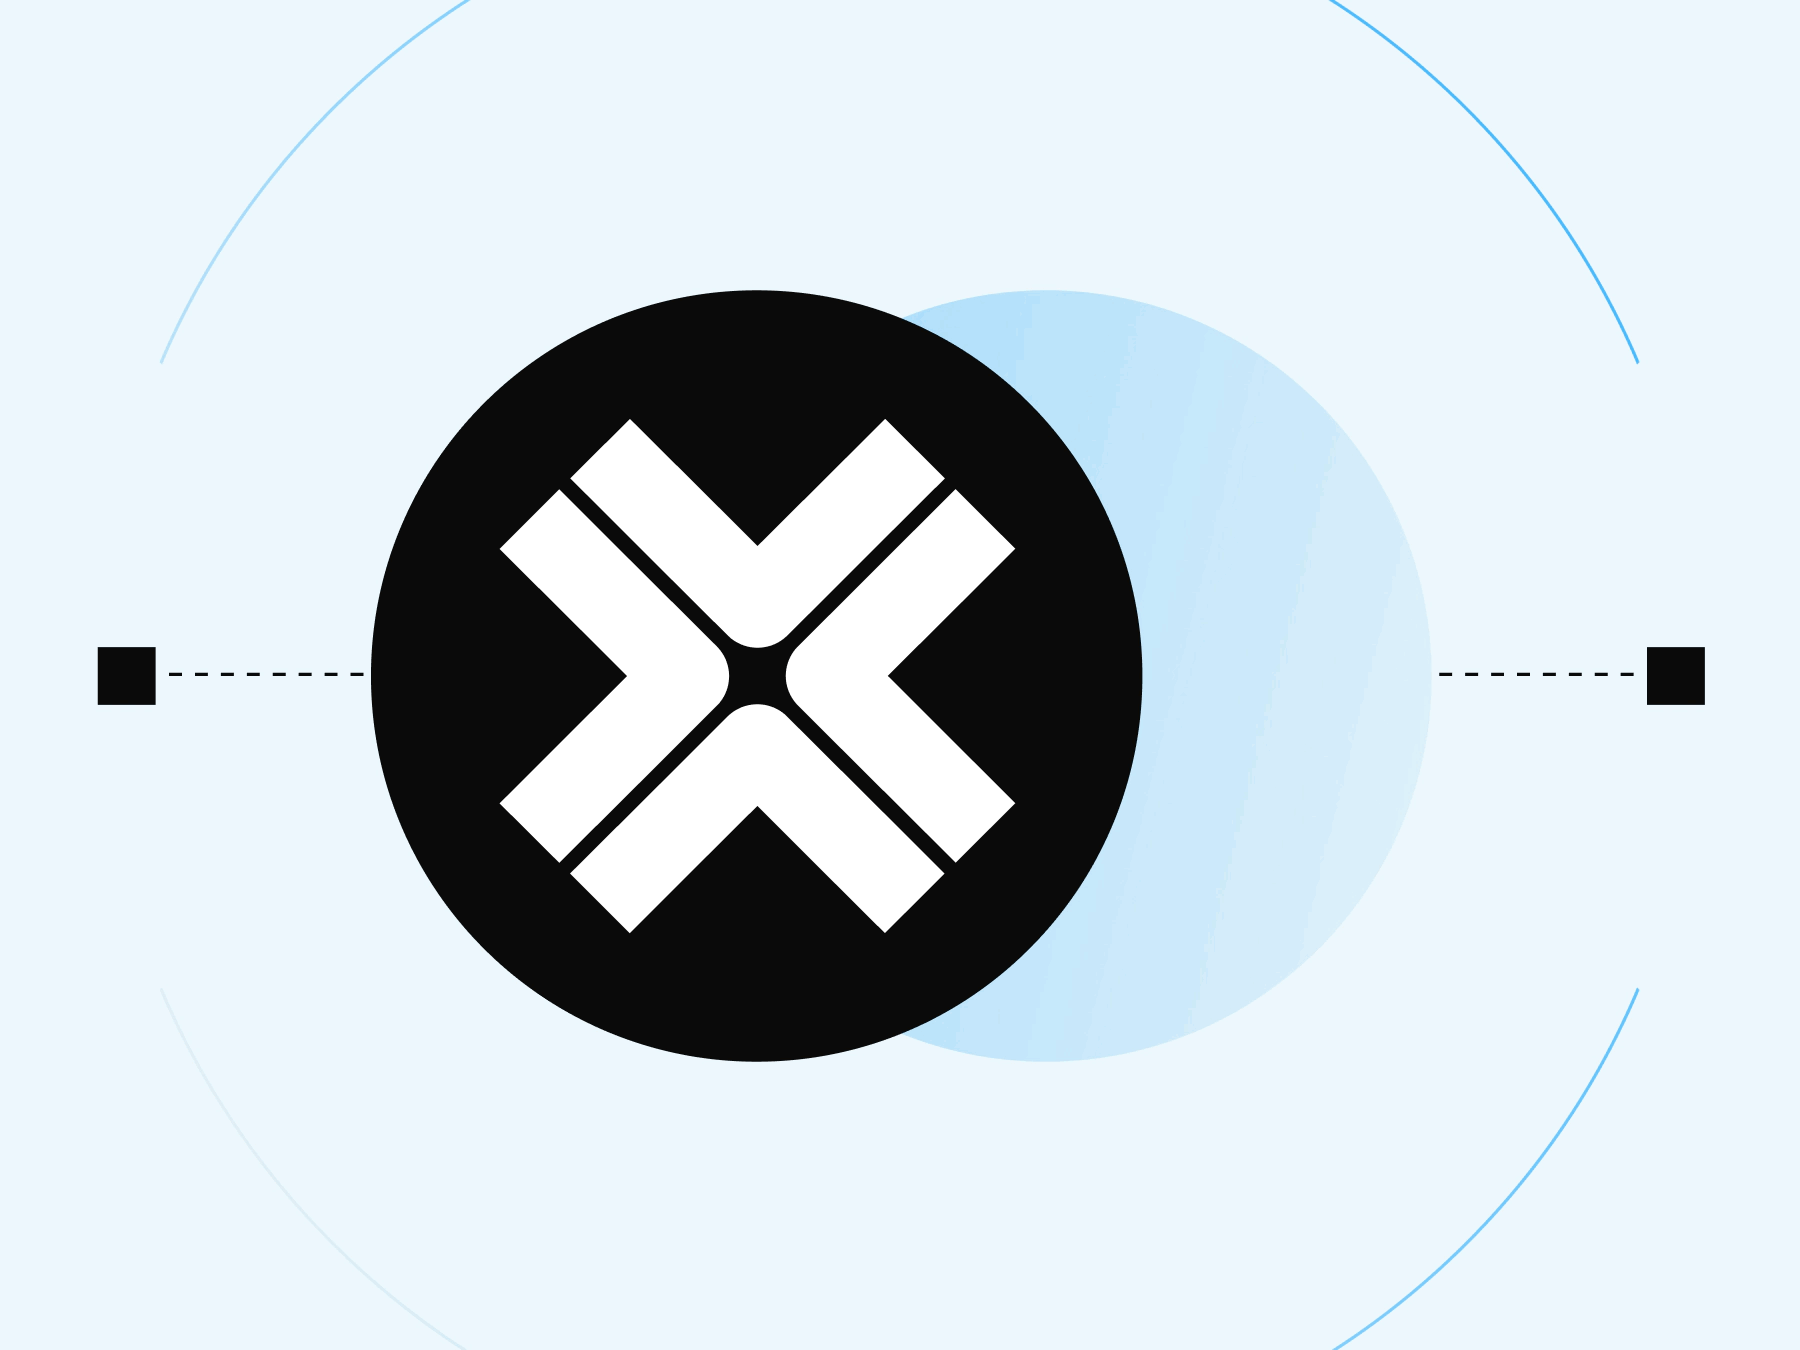 Black circle with a white Axelar logo, surrounded by blue arcs and connected to two smaller squares by dashed lines.